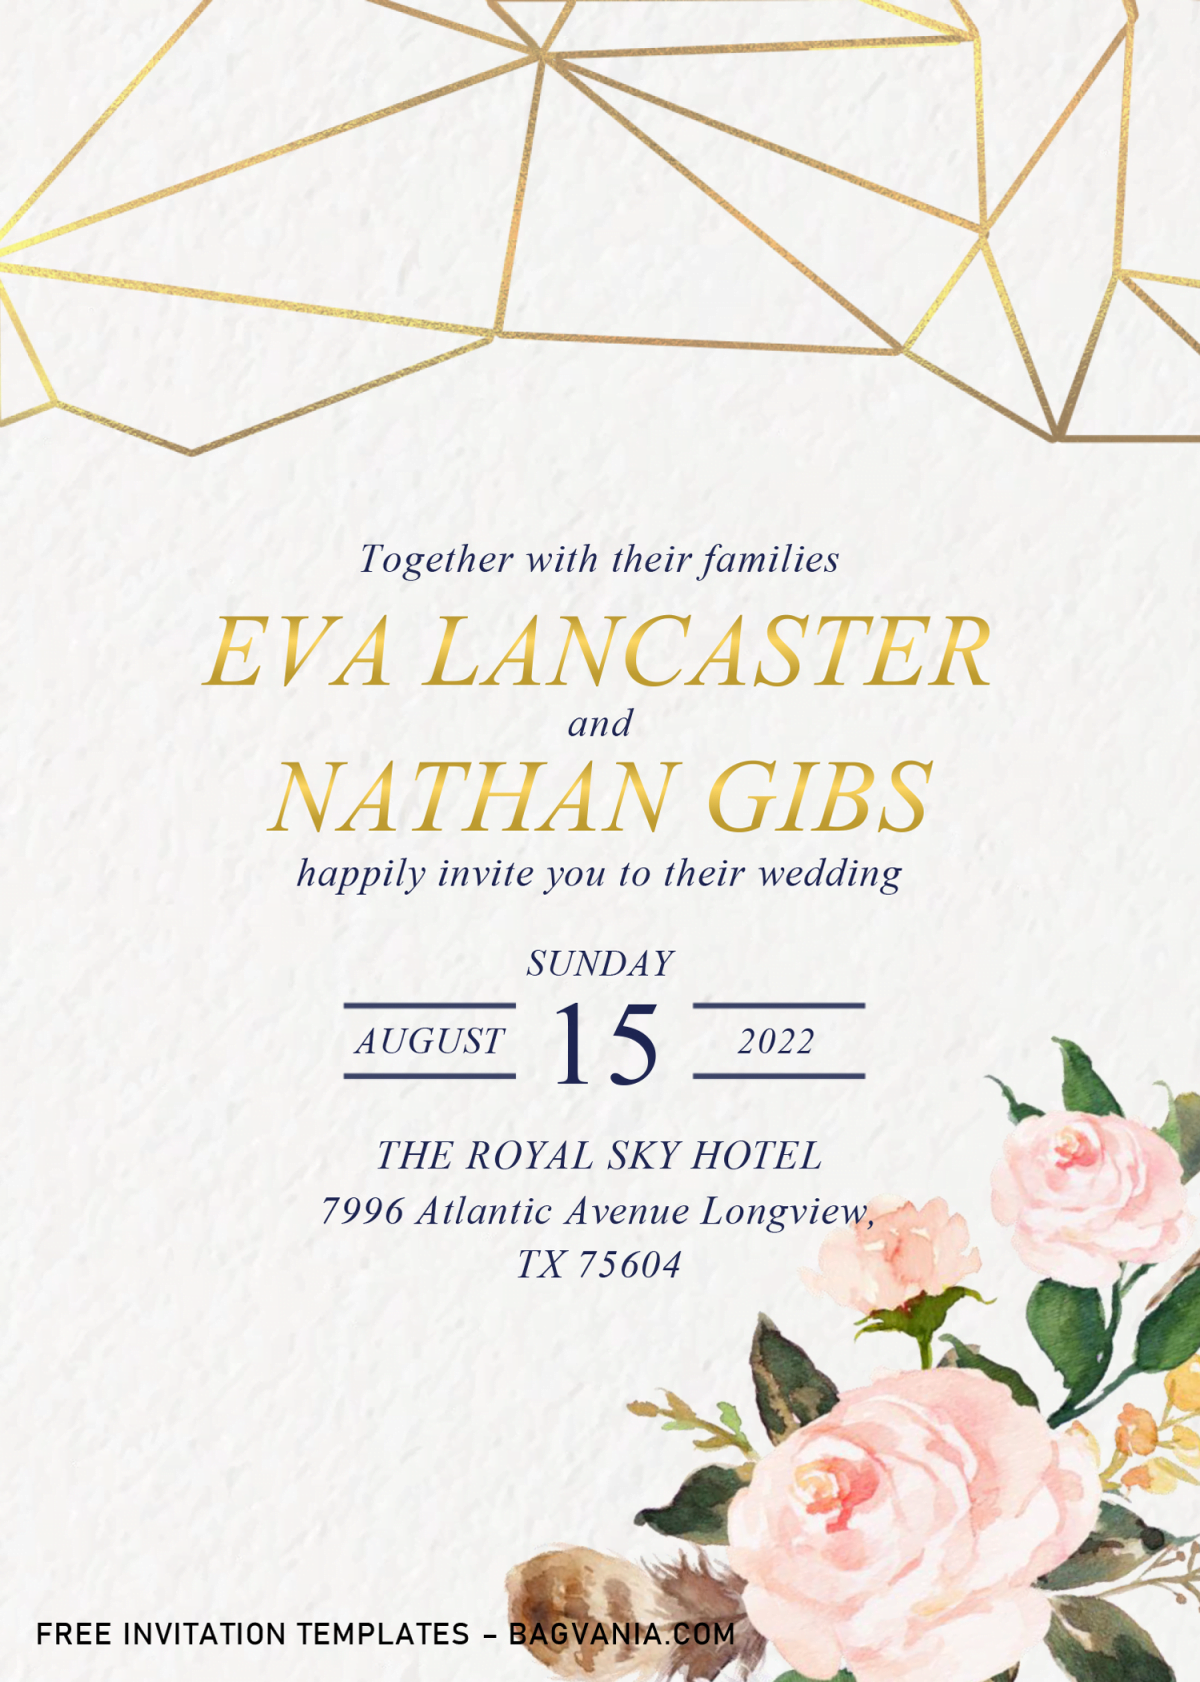 Geometric Floral Invitation Templates - Editable .Docx and has watercolor floral